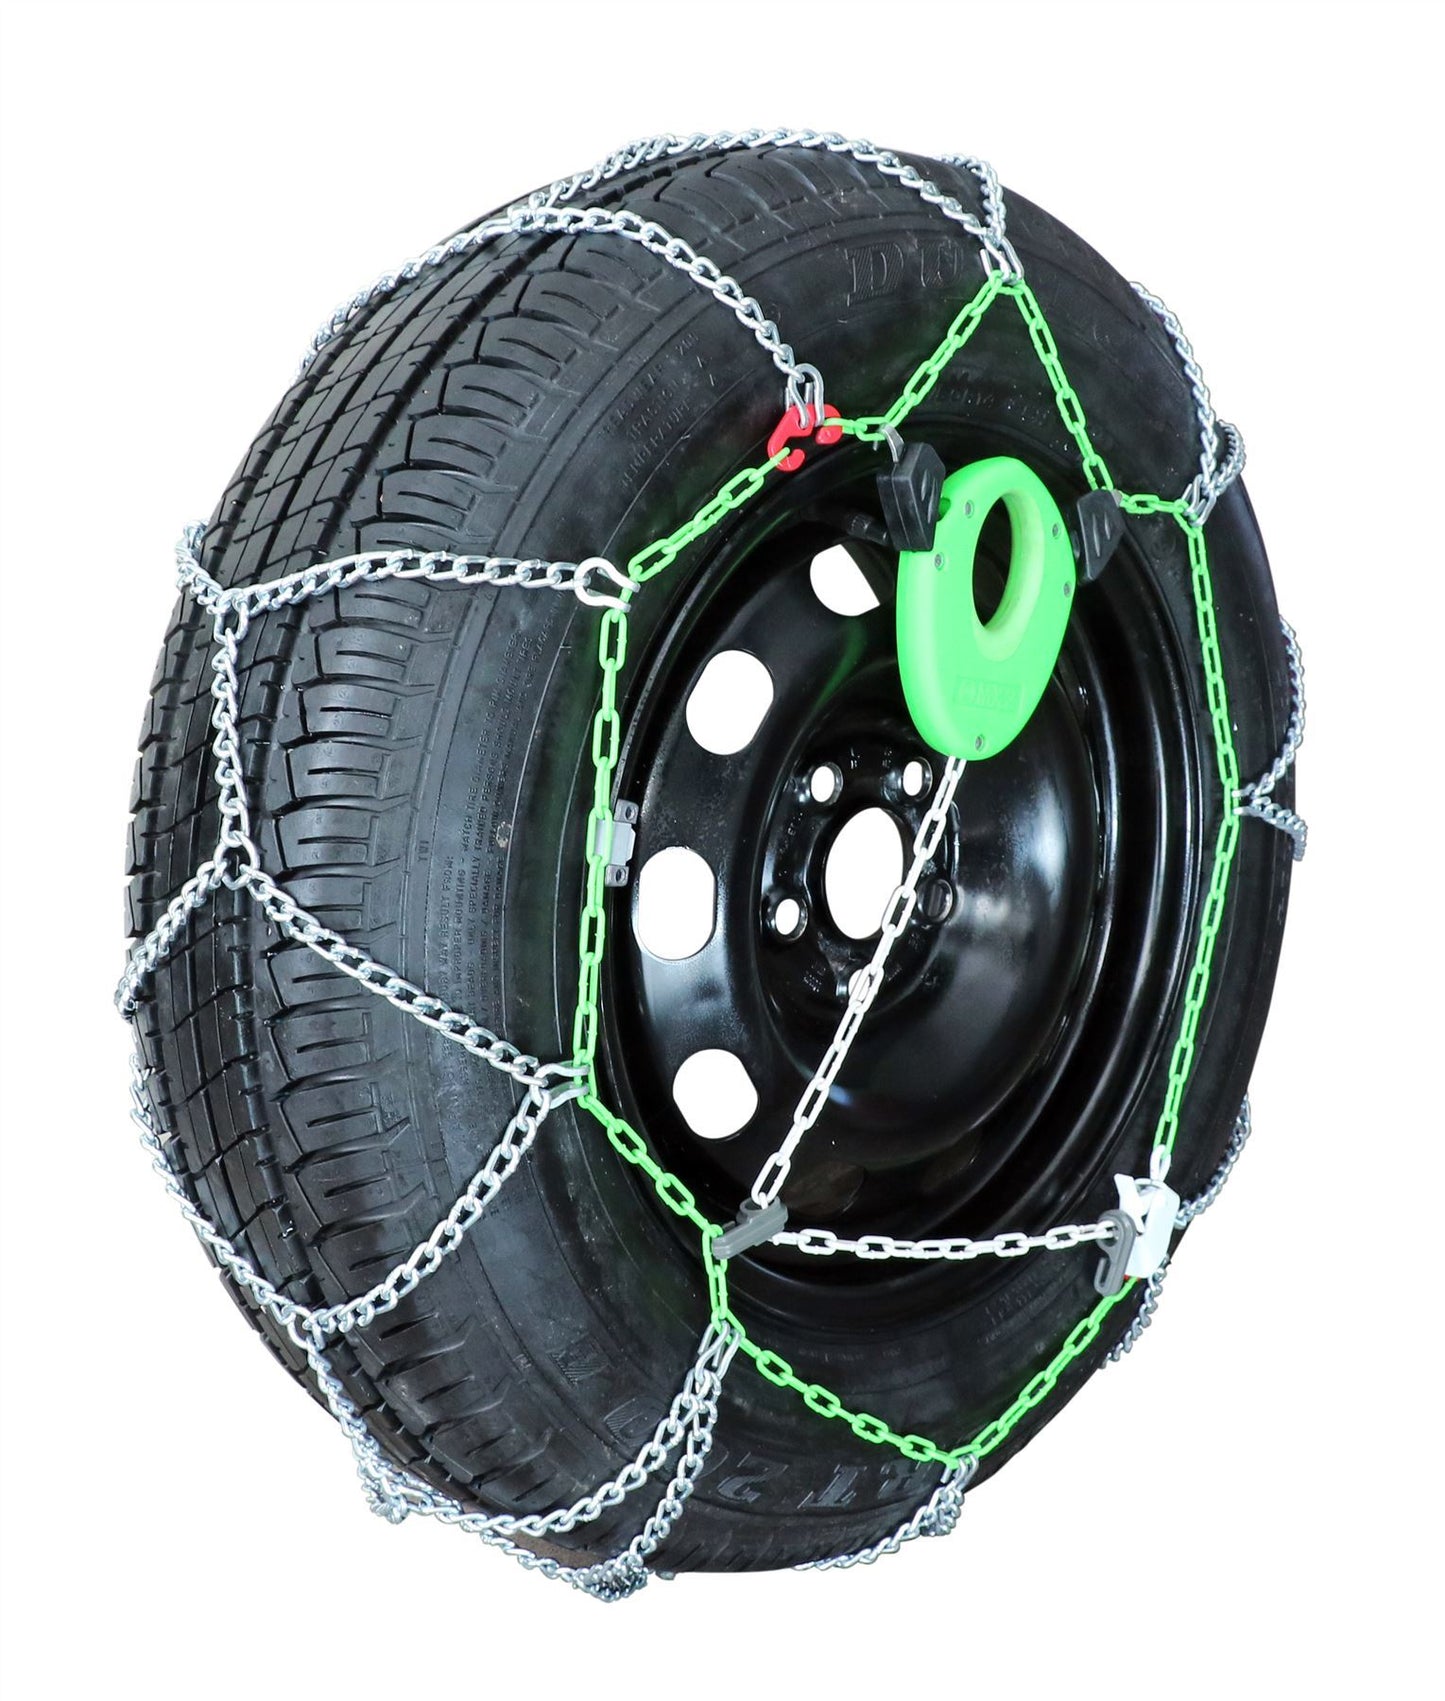 Green Valley TXR7 Winter 7mm Snow Chains - Car Tyre for 17" Wheels 225/55-17